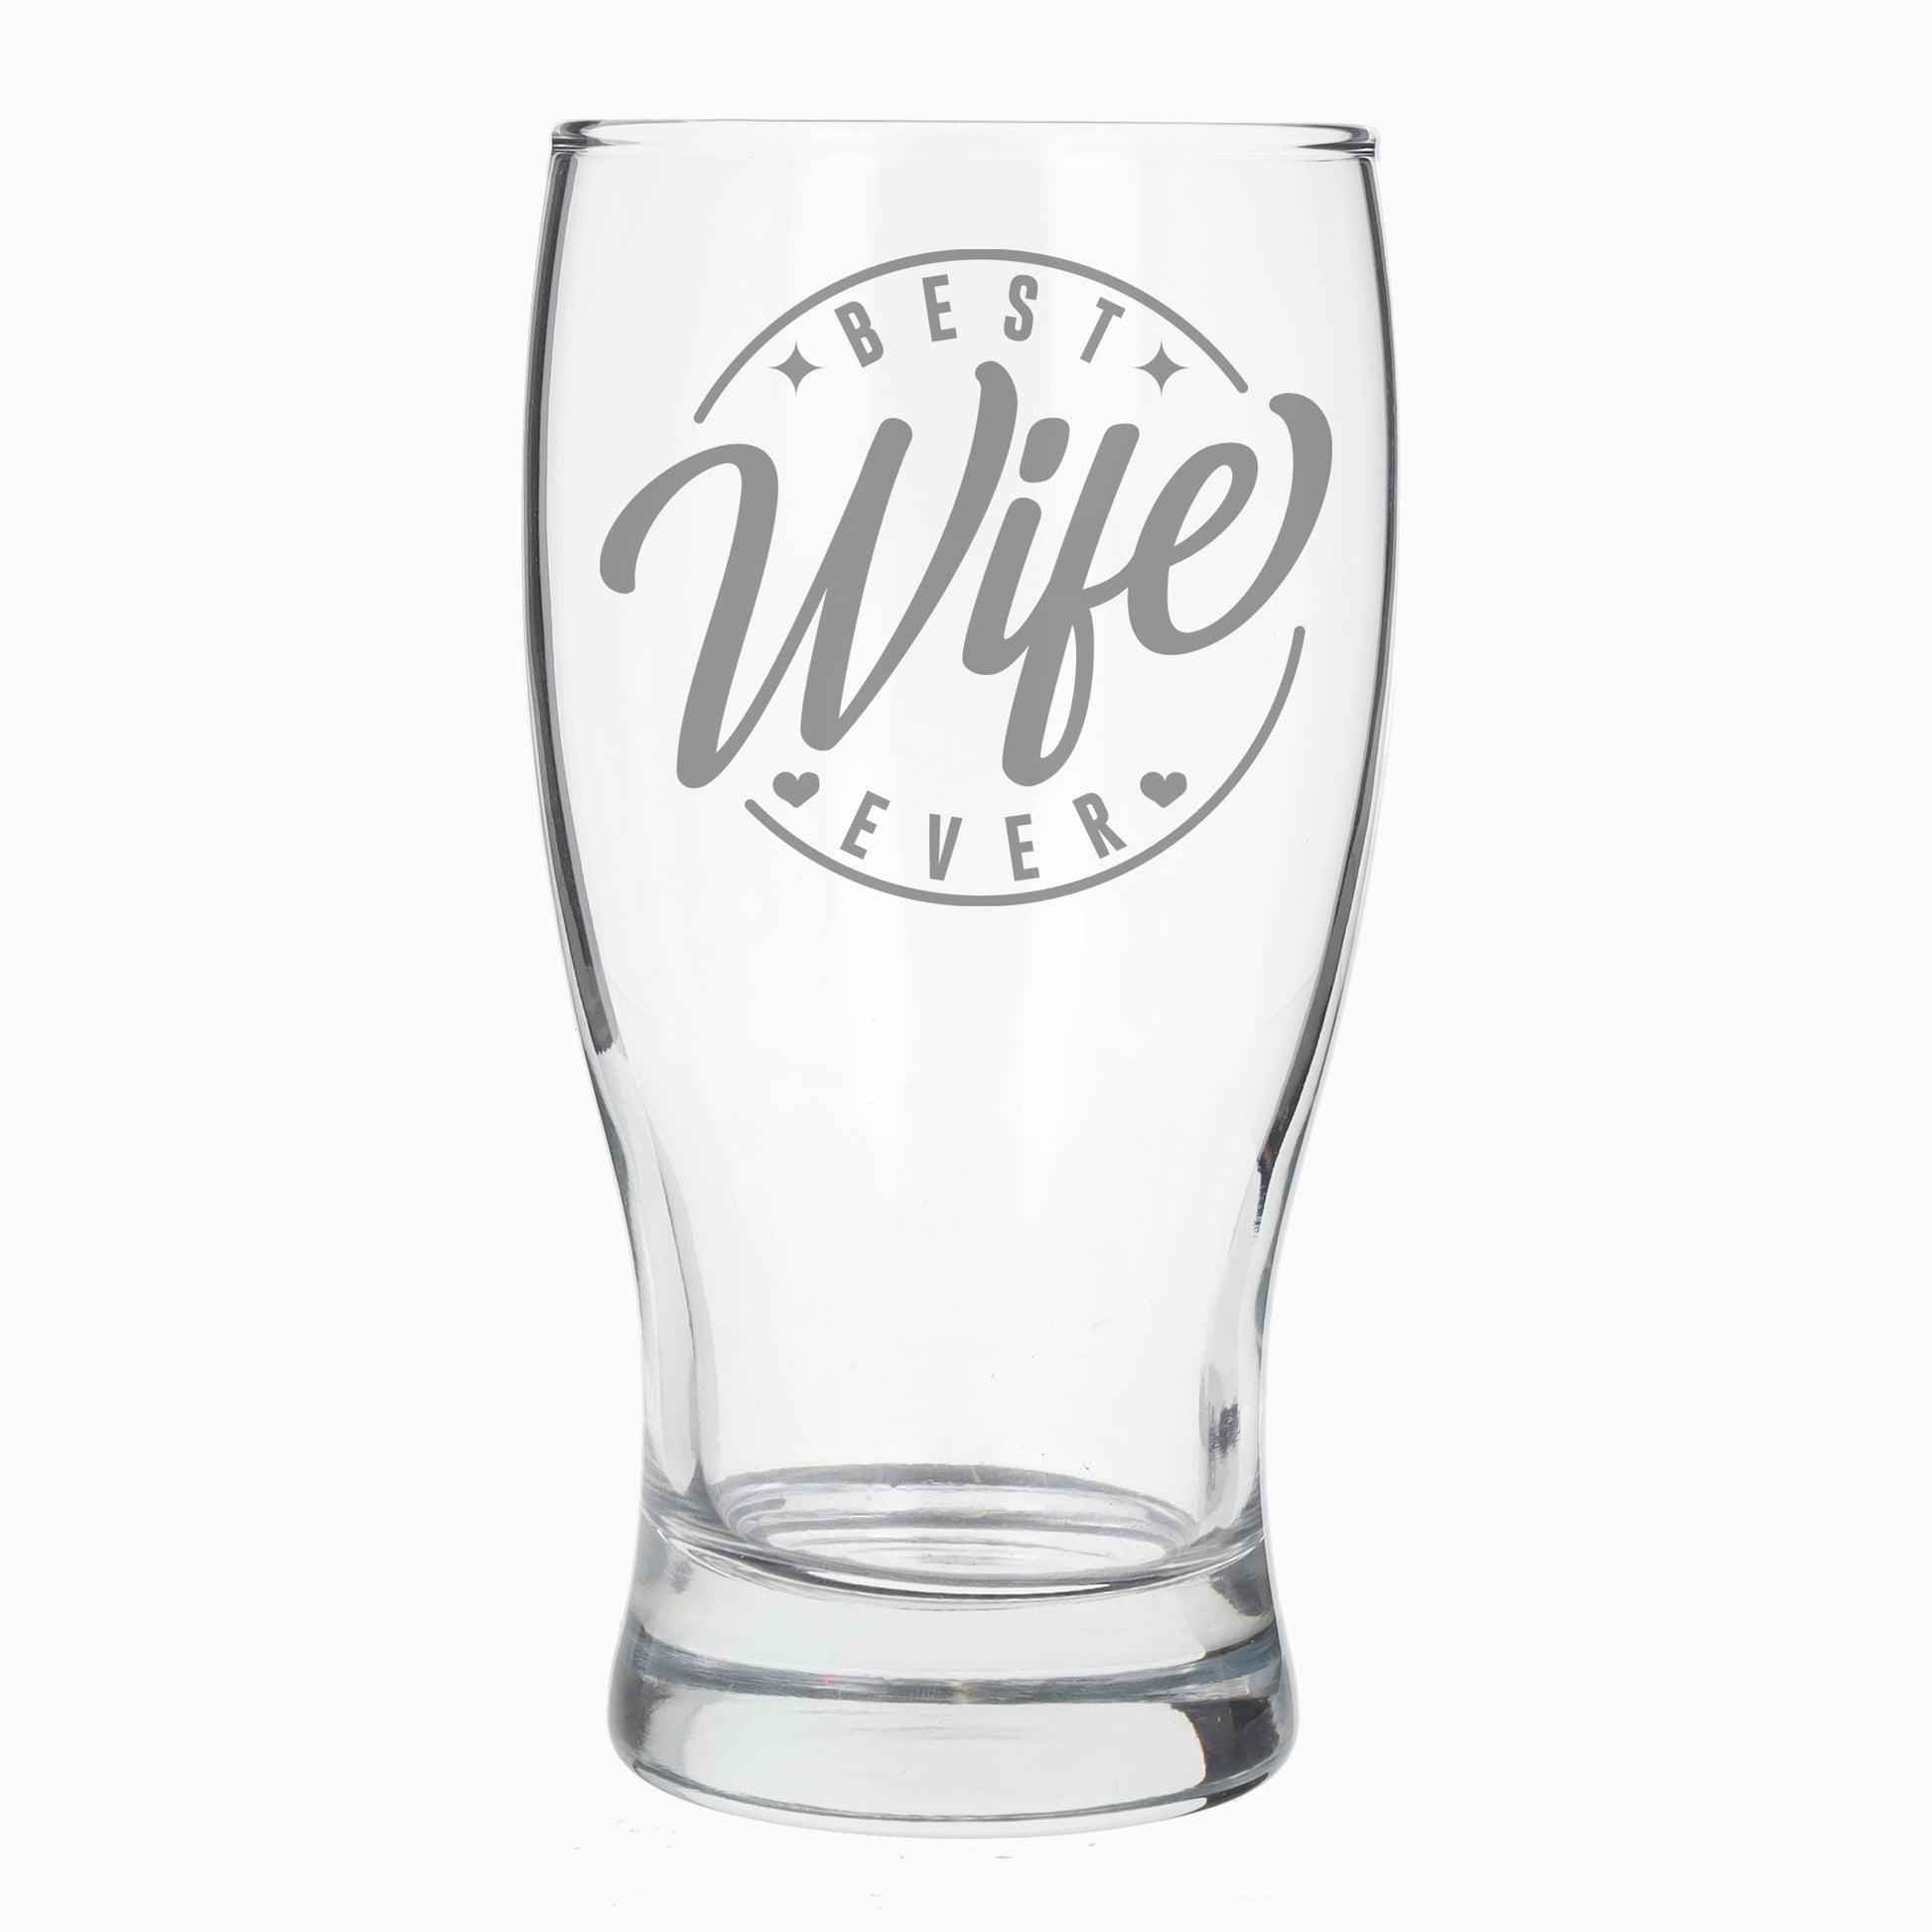 Best Wife Ever Engraved Beer Pint Glass and/or Coaster Set  - Always Looking Good - Beer Glass Only  